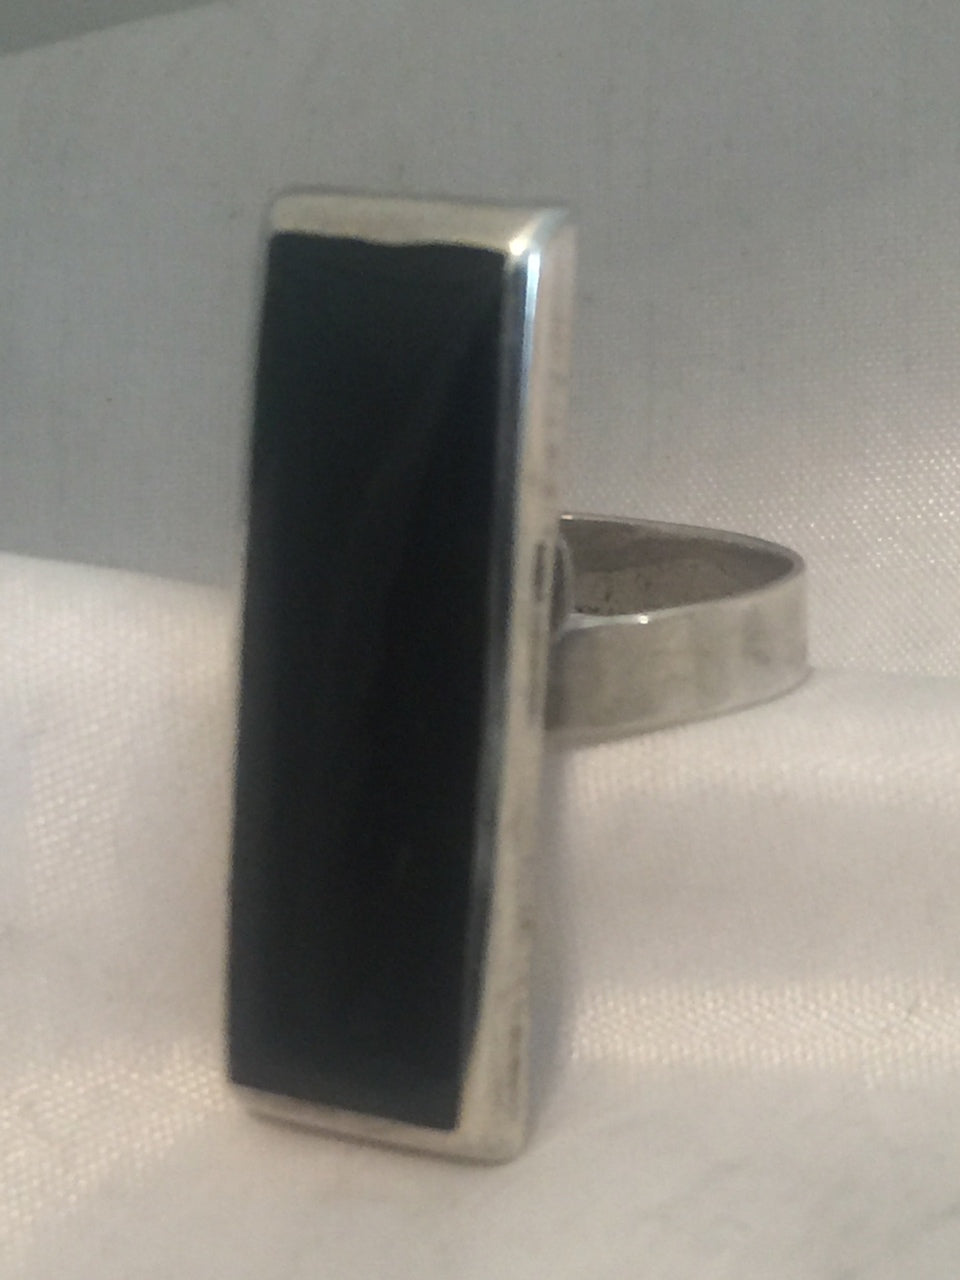 Vintage Sterling Silver Long Onyx Ring ADJ Size  7.5 - 10  4.3g  Mexico